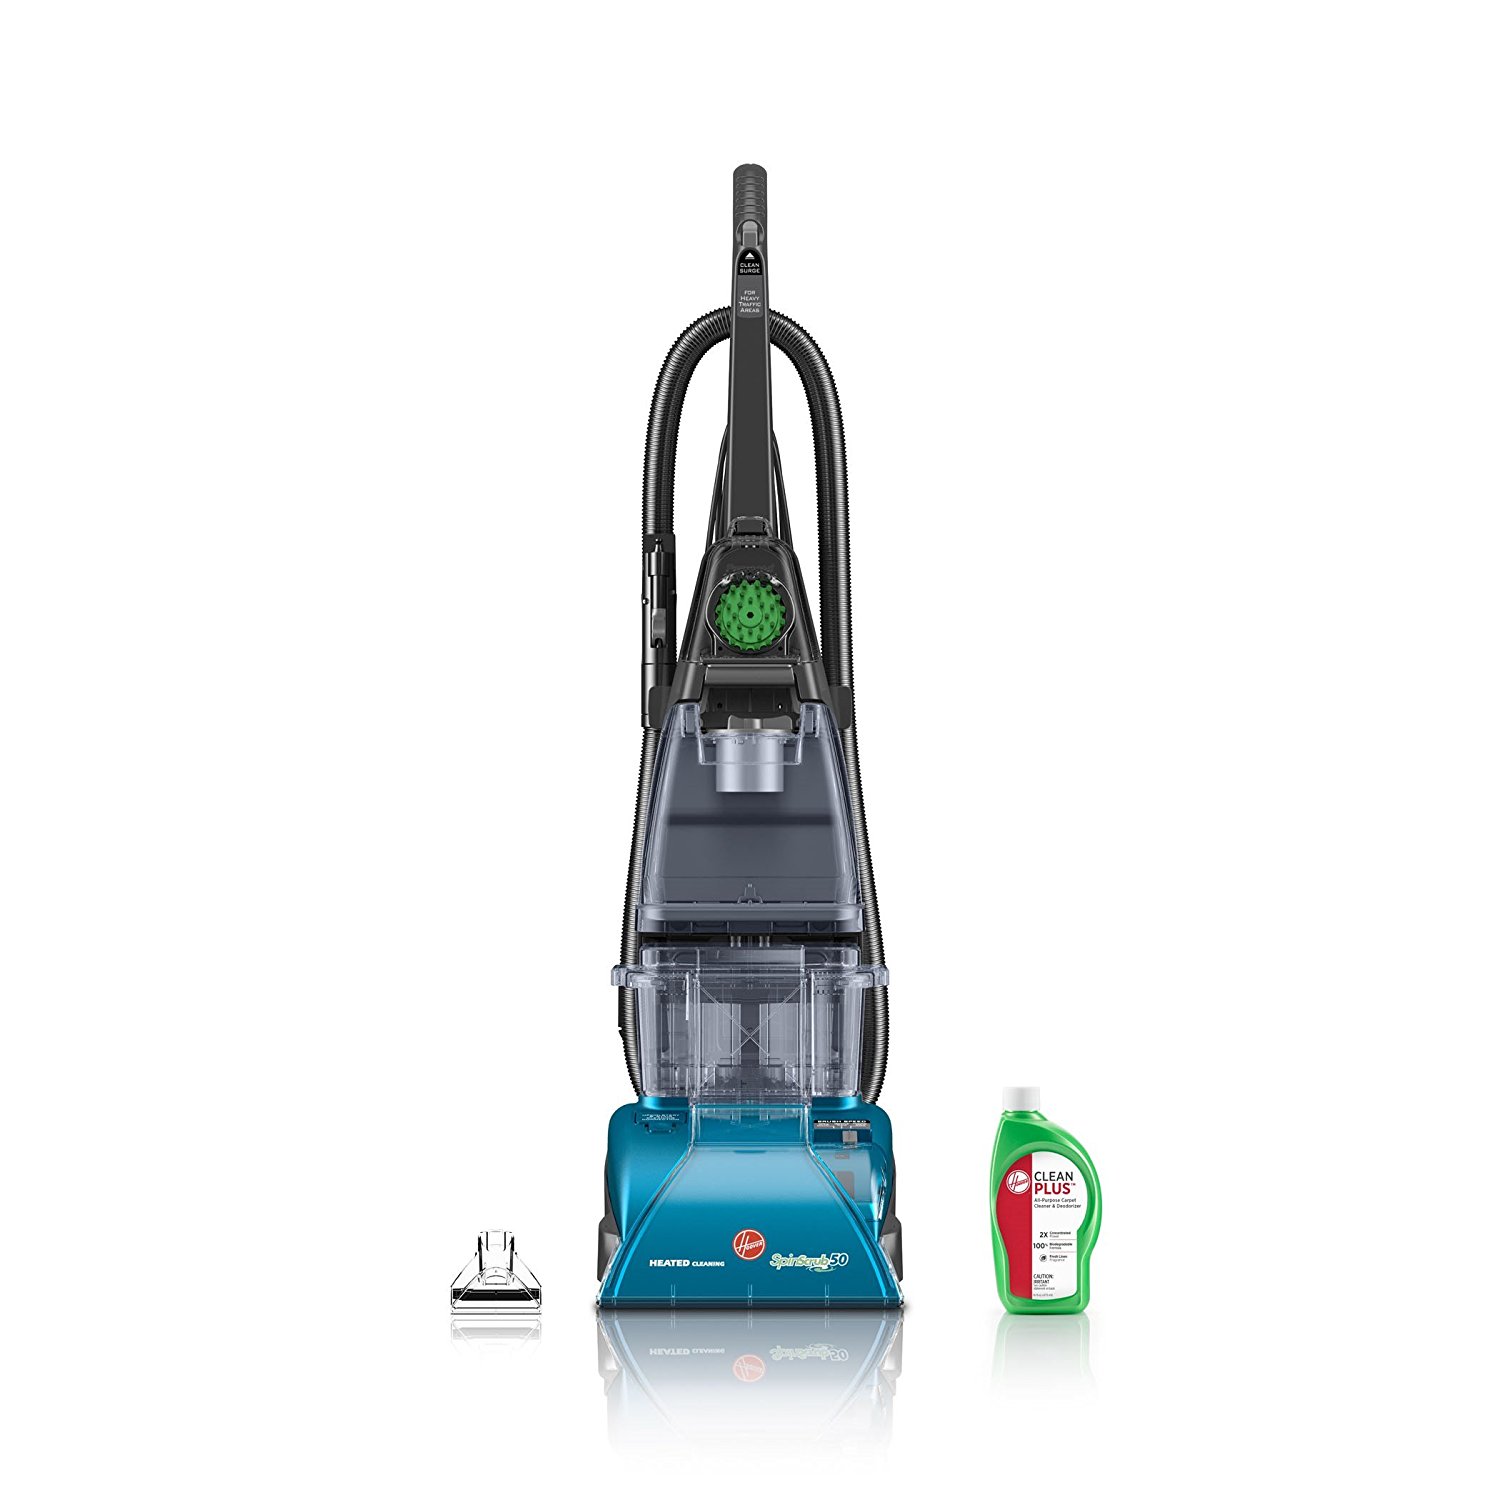 Save on the Hoover Carpet Cleaner SteamVac – Just $69.99!